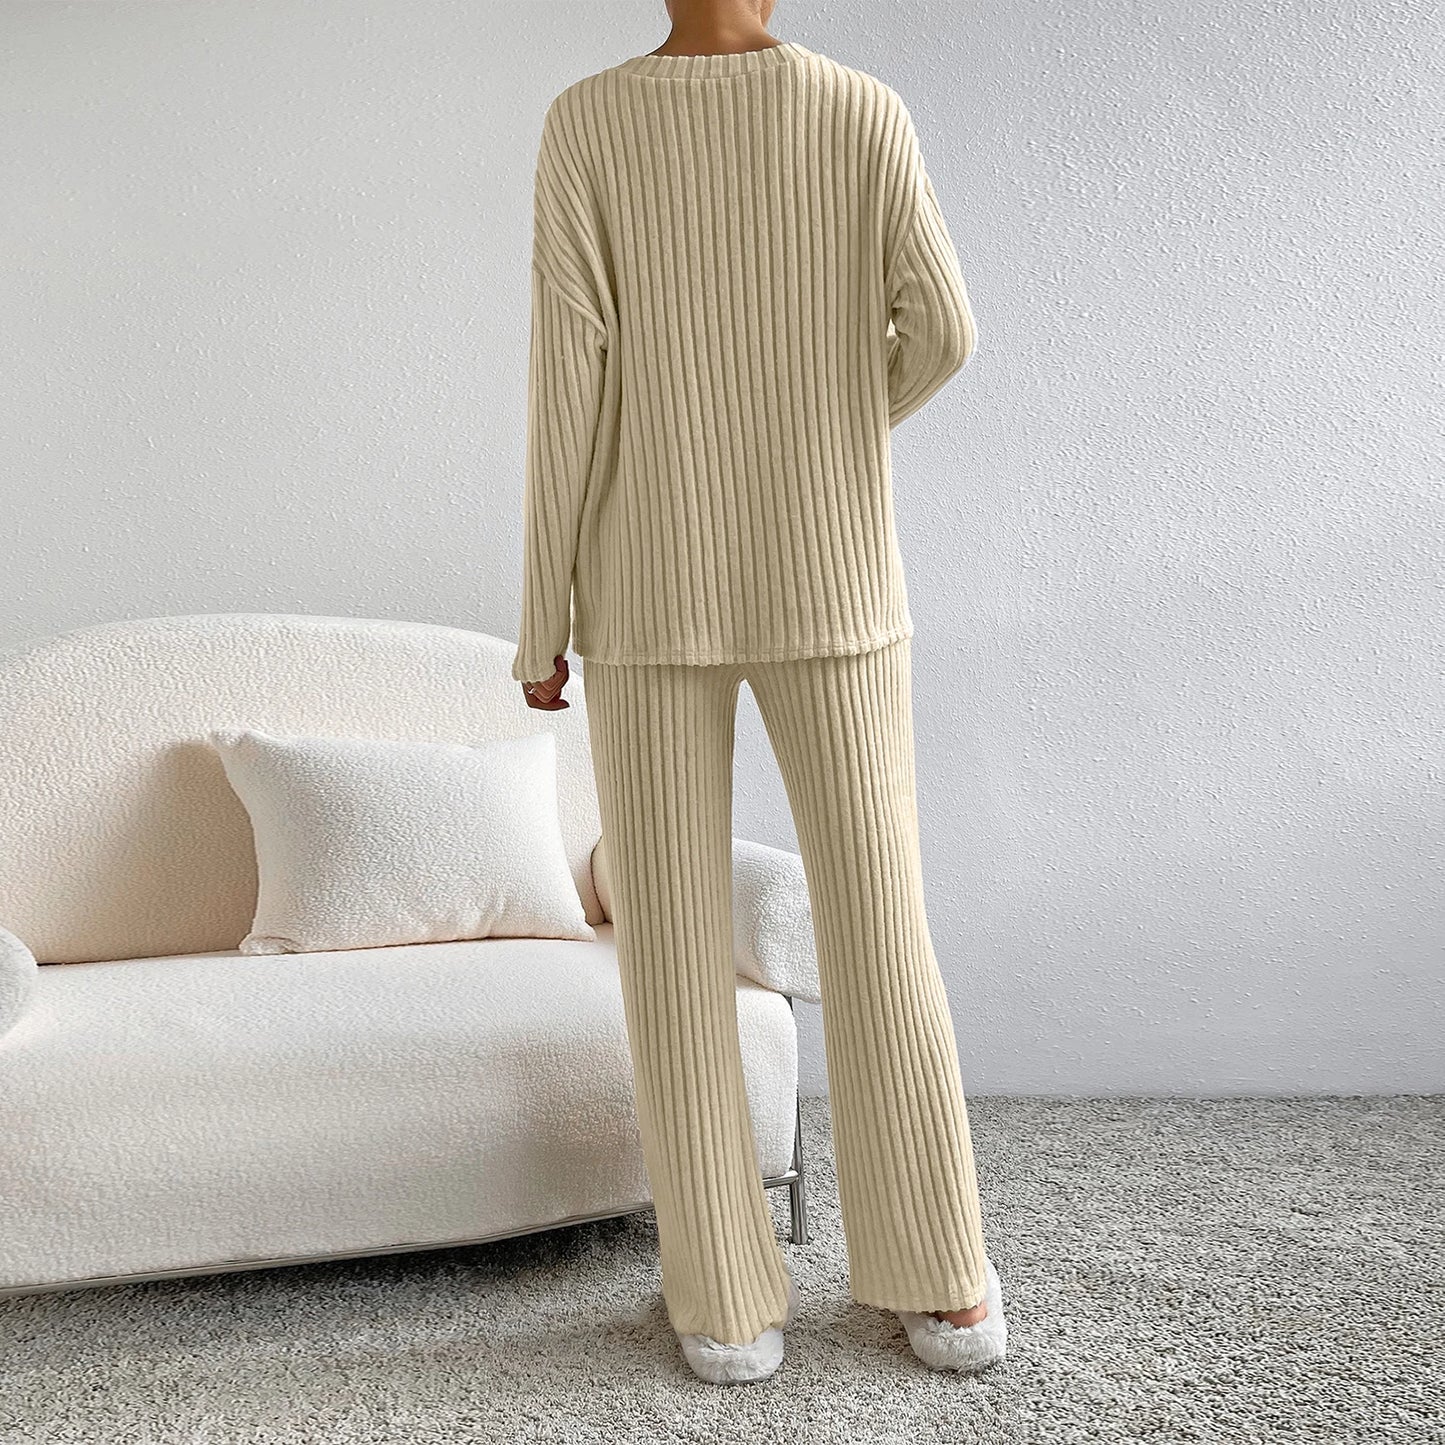 Women Long Sleeve Tops & Palazzo Pants Set/Solid Color Knit Pullover Shirts And Pants